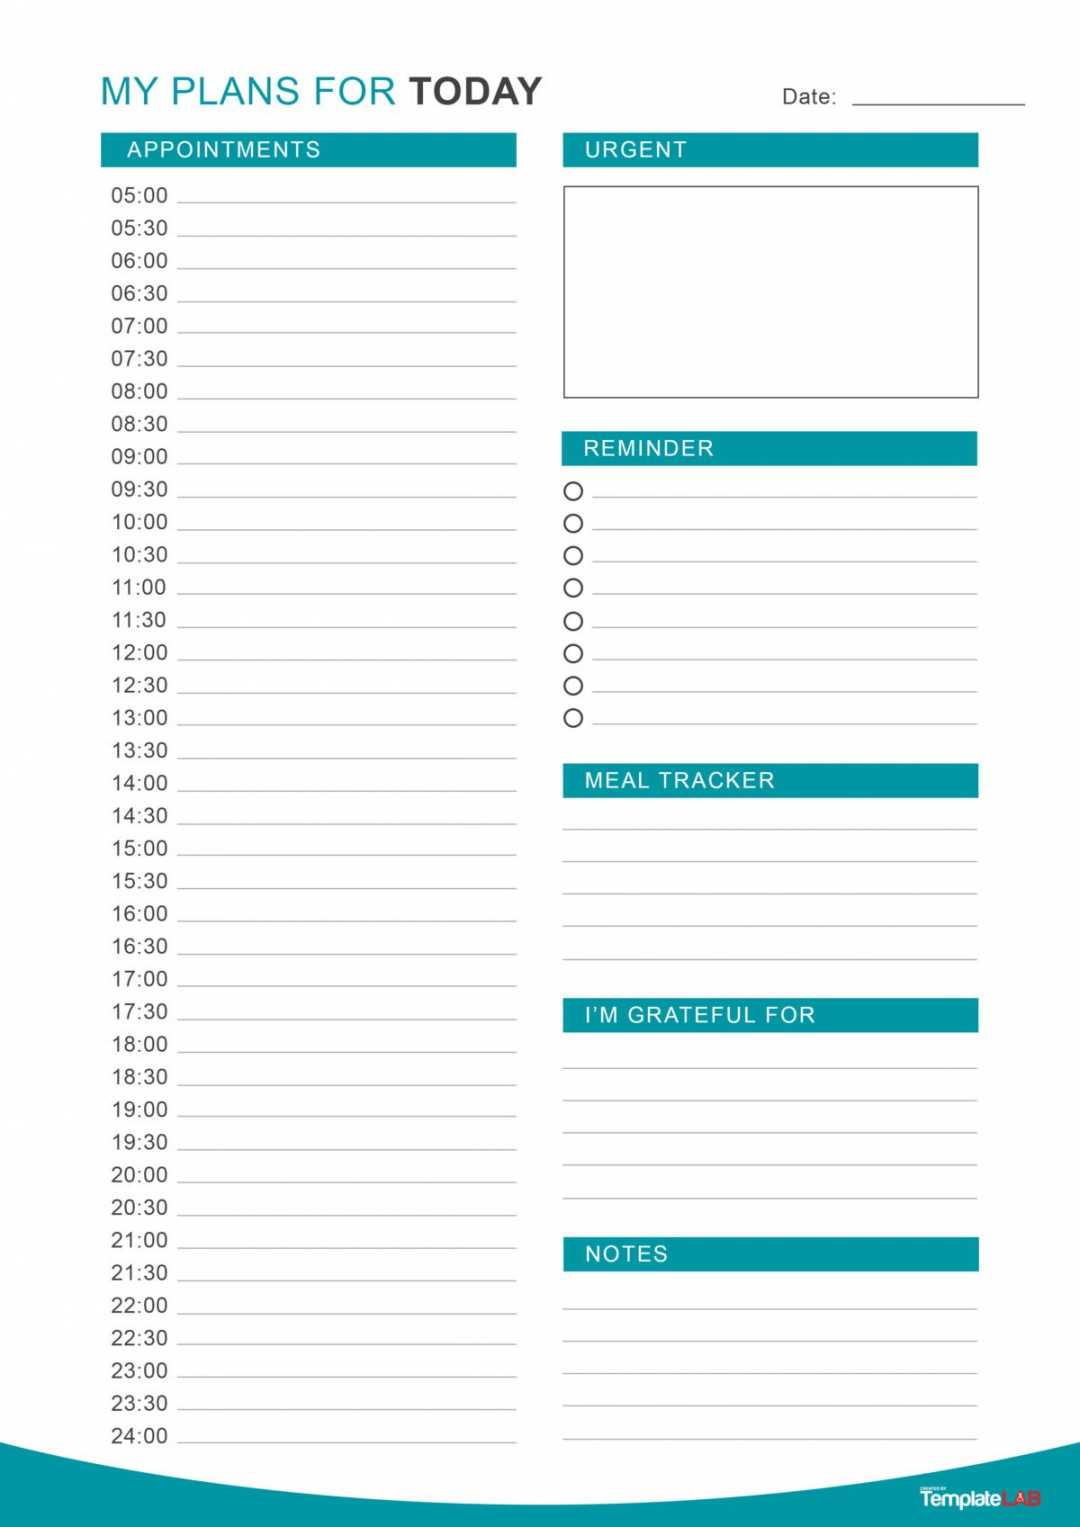 Free Printable Day Planner - Printable -  Printable Daily Planner Templates (FREE in Word/Excel/PDF)